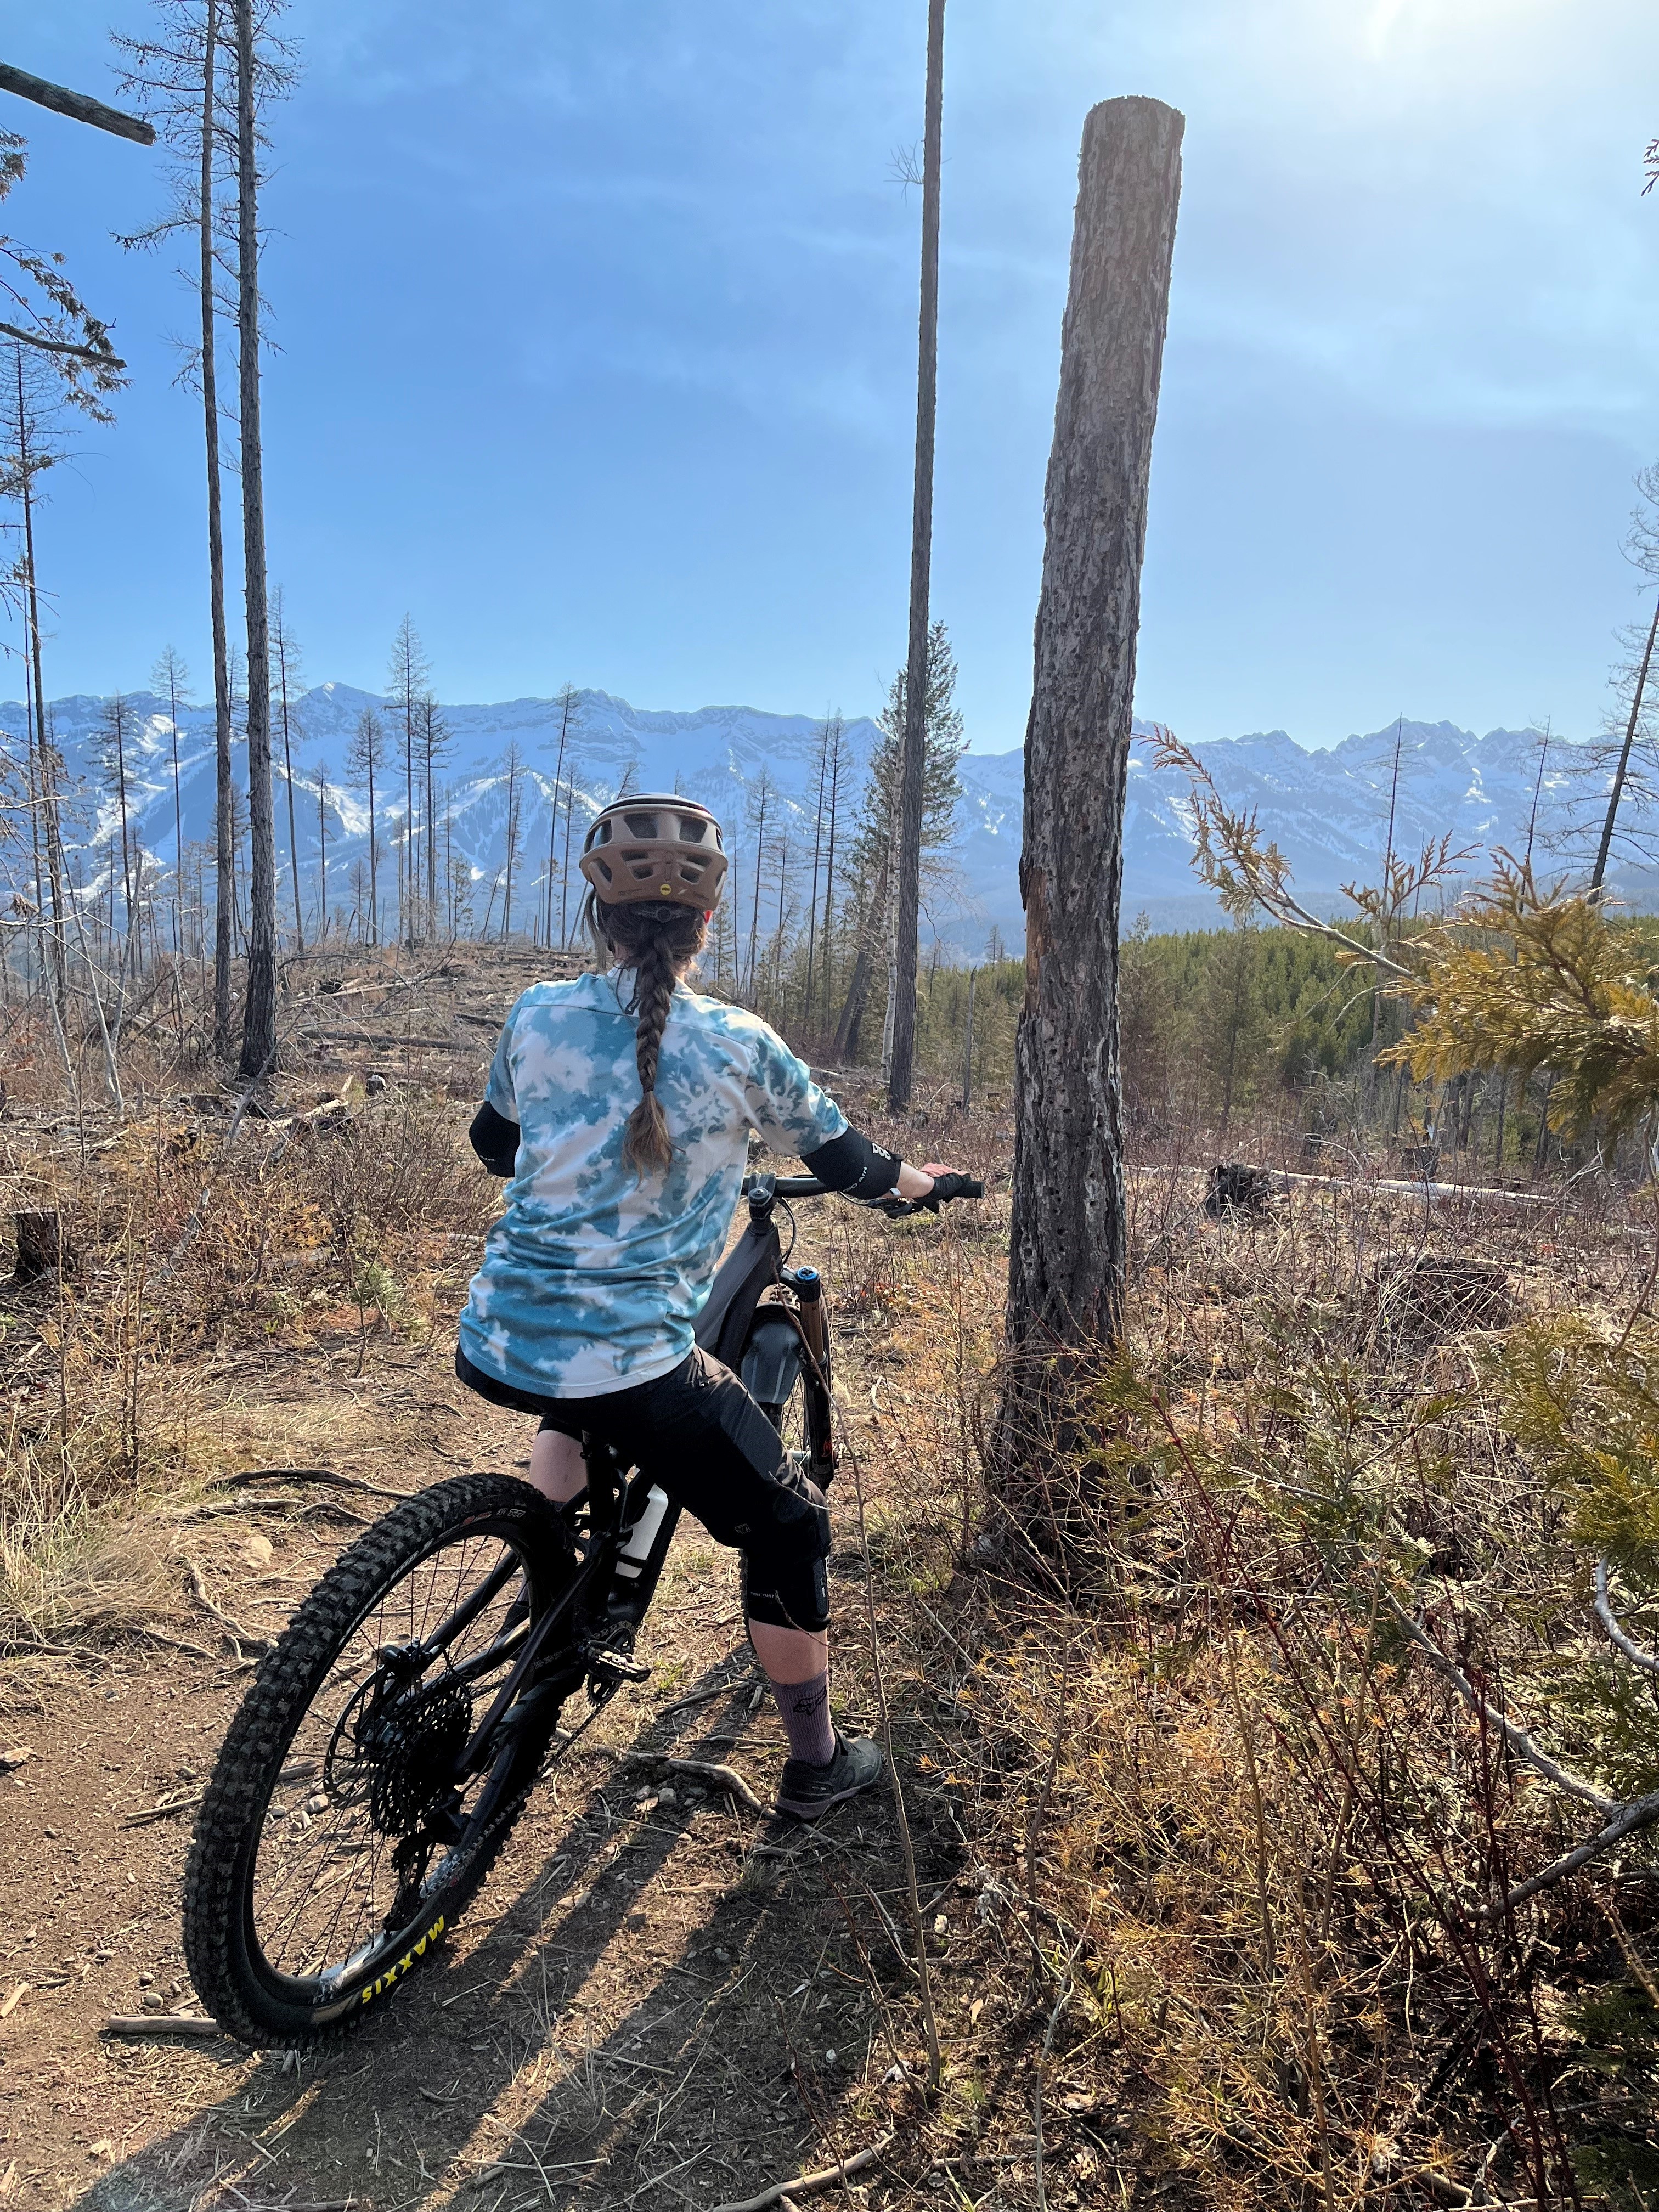 A woman with a braid in her hair wears a helmet while going for a mountain bike ride in the forest area with a Mountain View